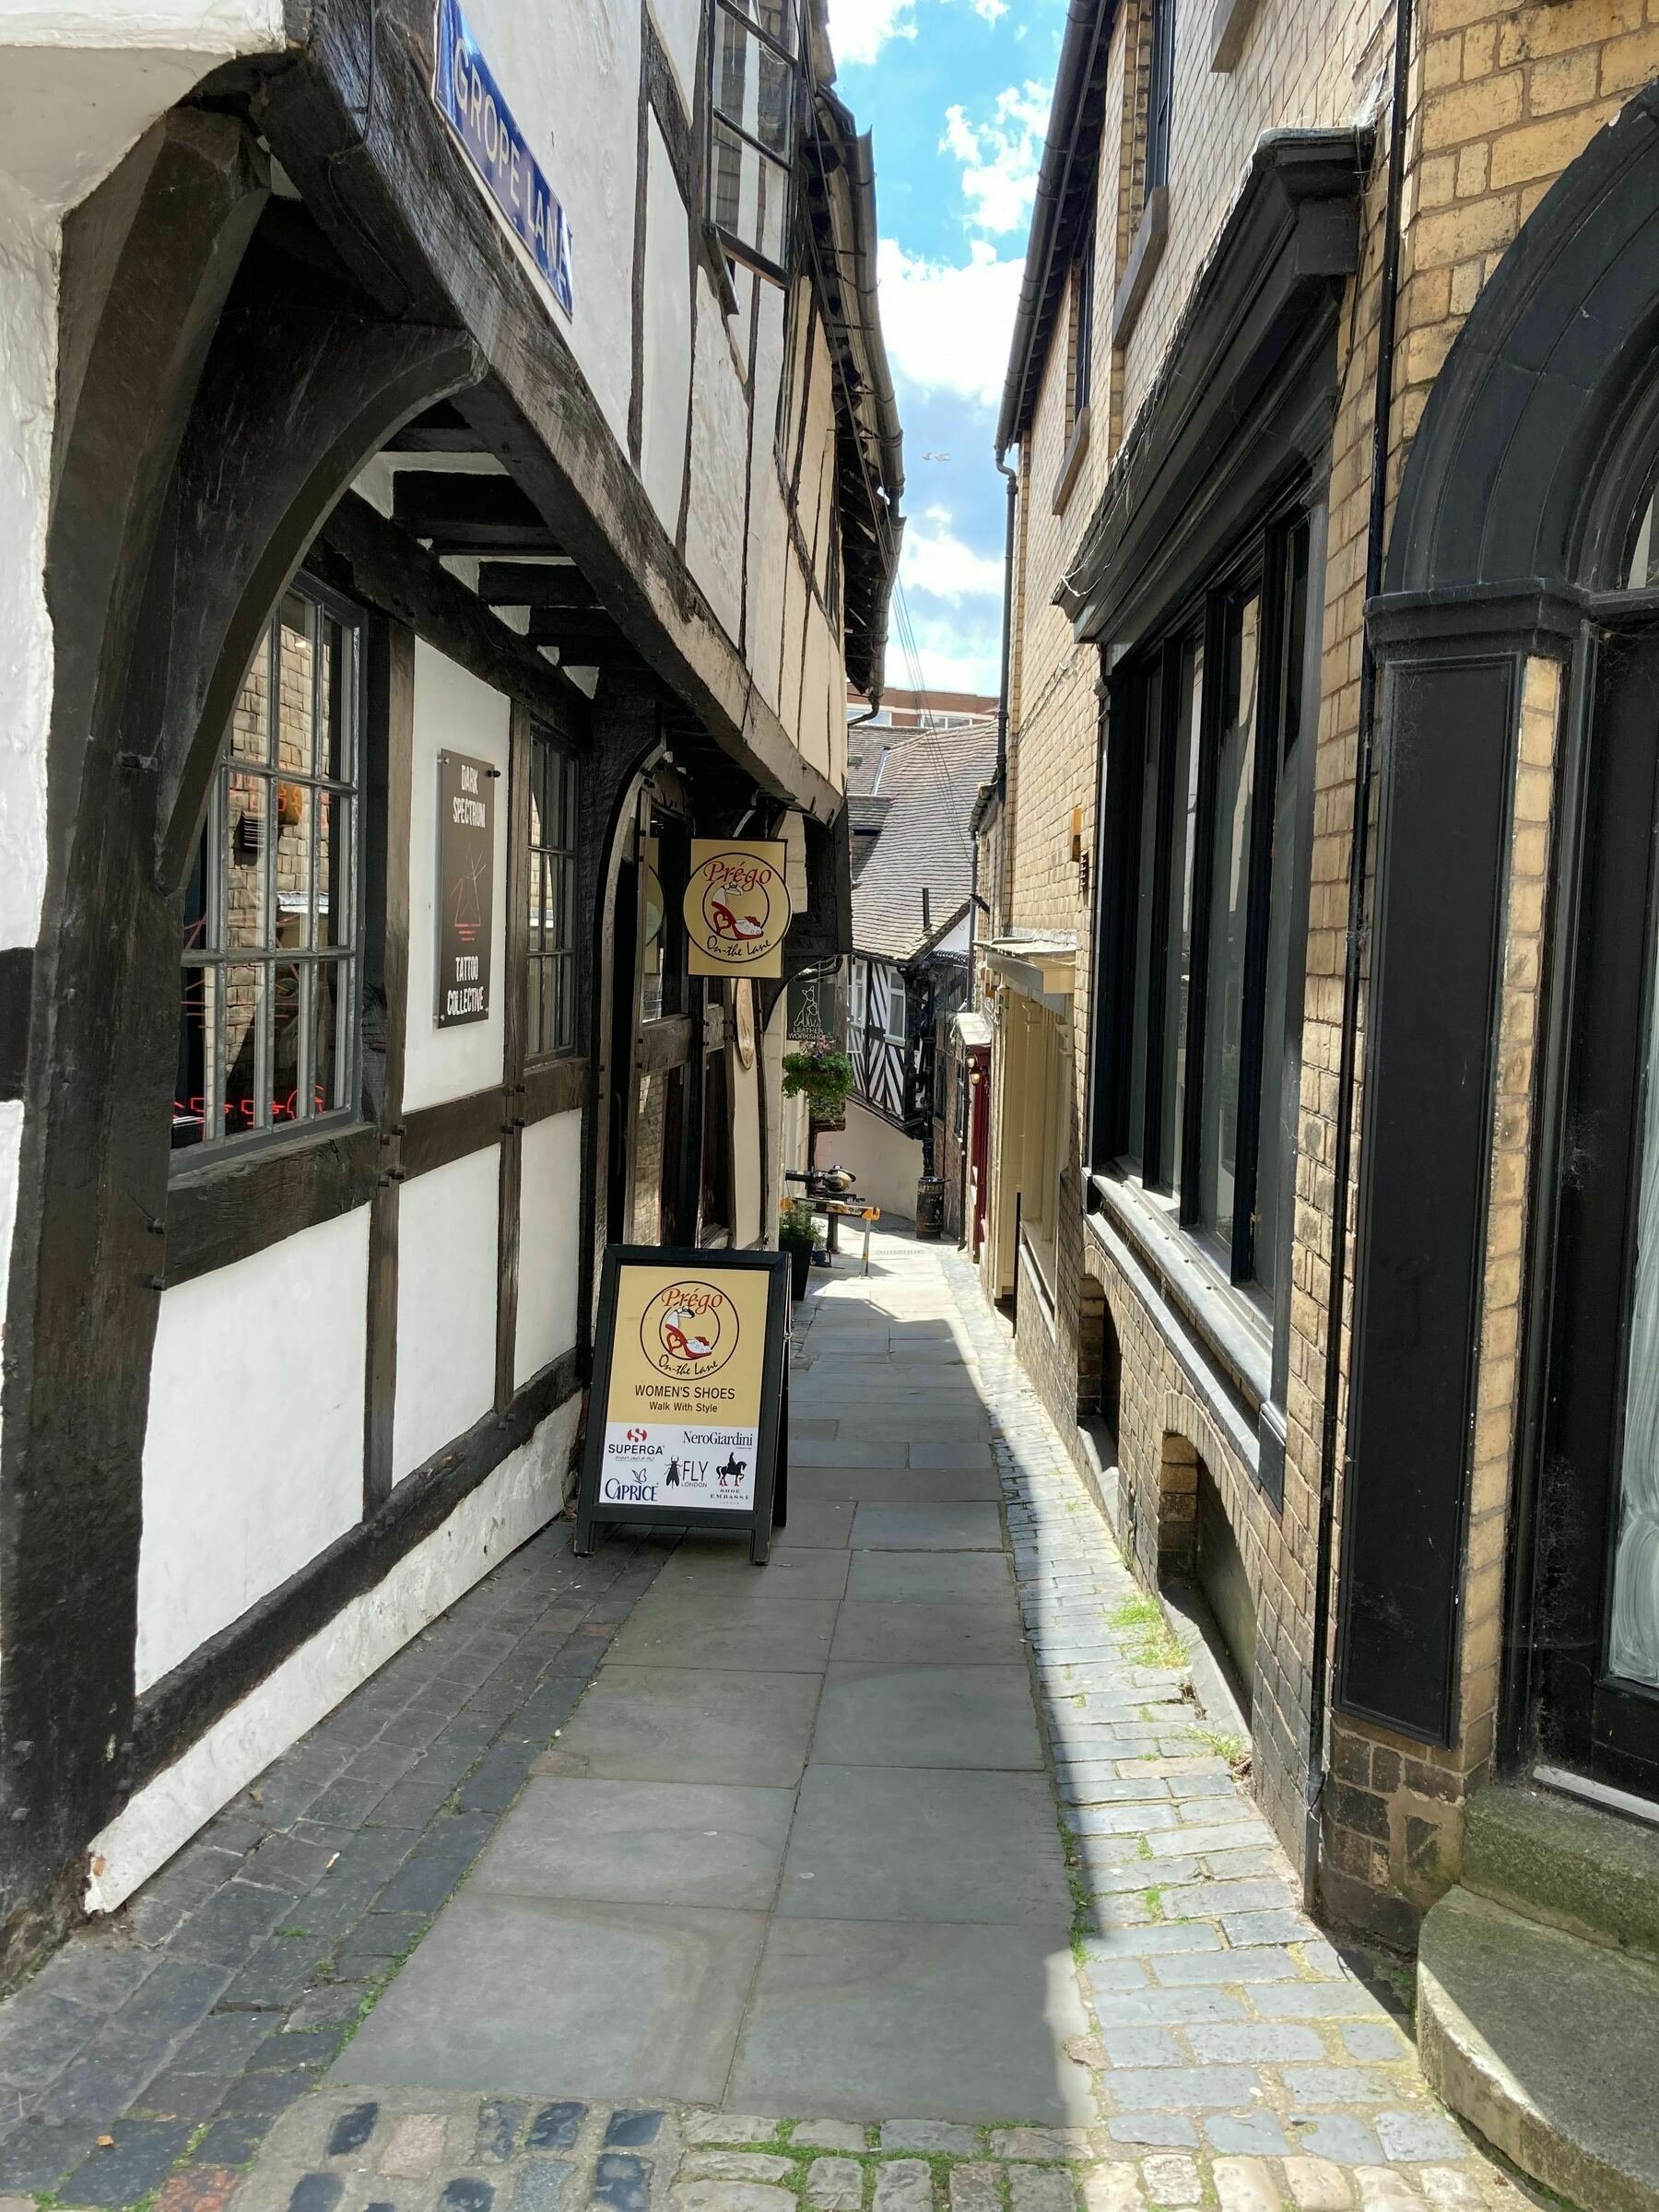 A view along the narrow alleyway known as Grope Lane in Shrewsbury UK.